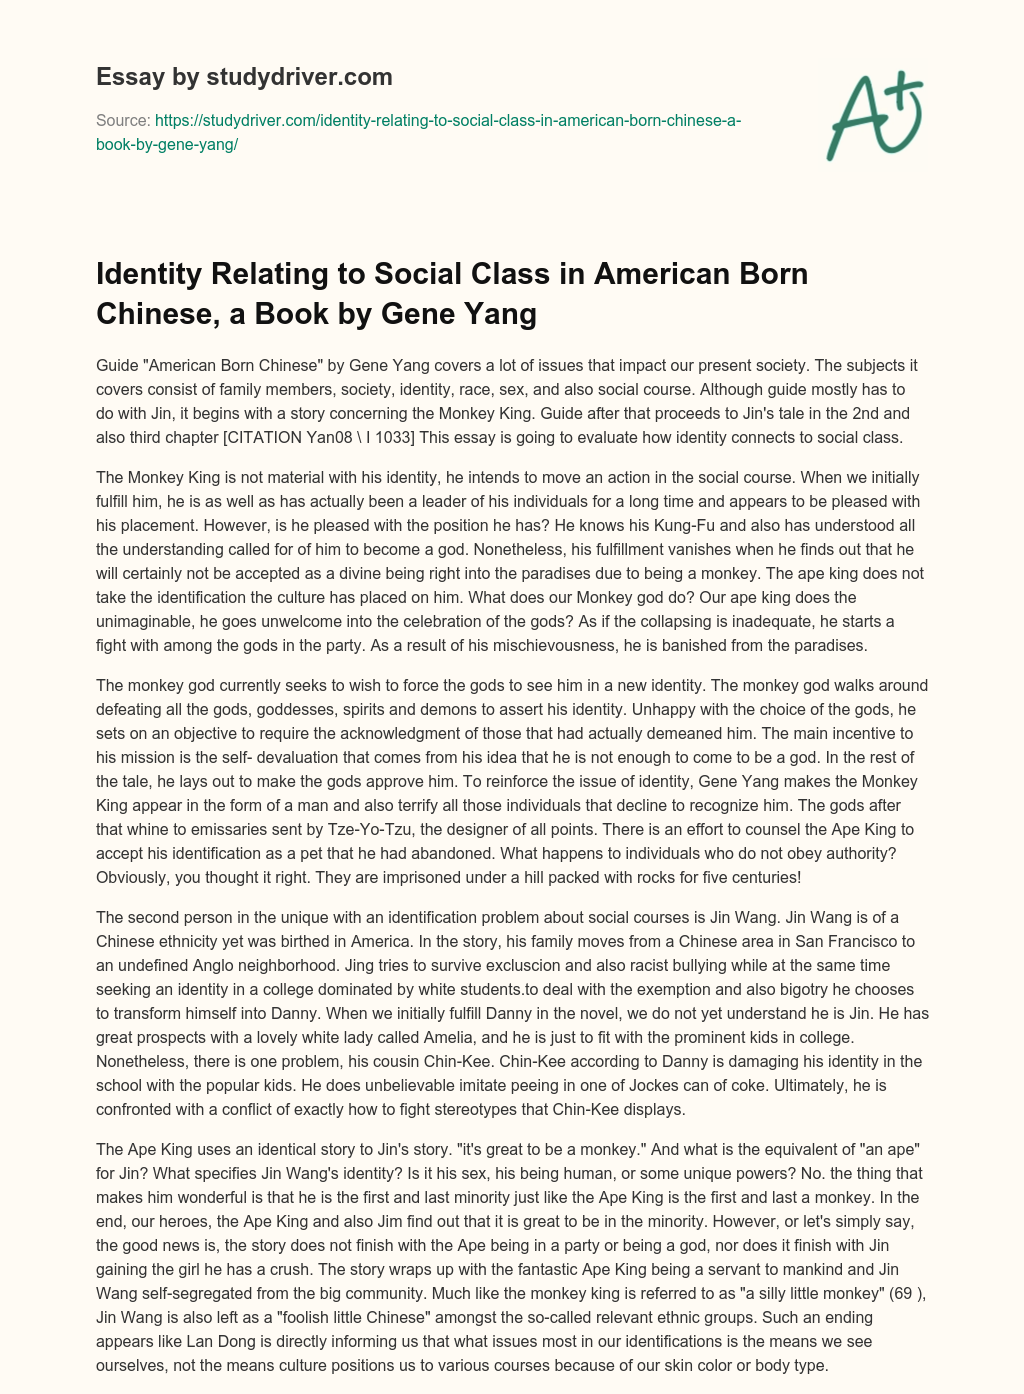 Identity Relating to Social Class in American Born Chinese, a Book by Gene Yang essay